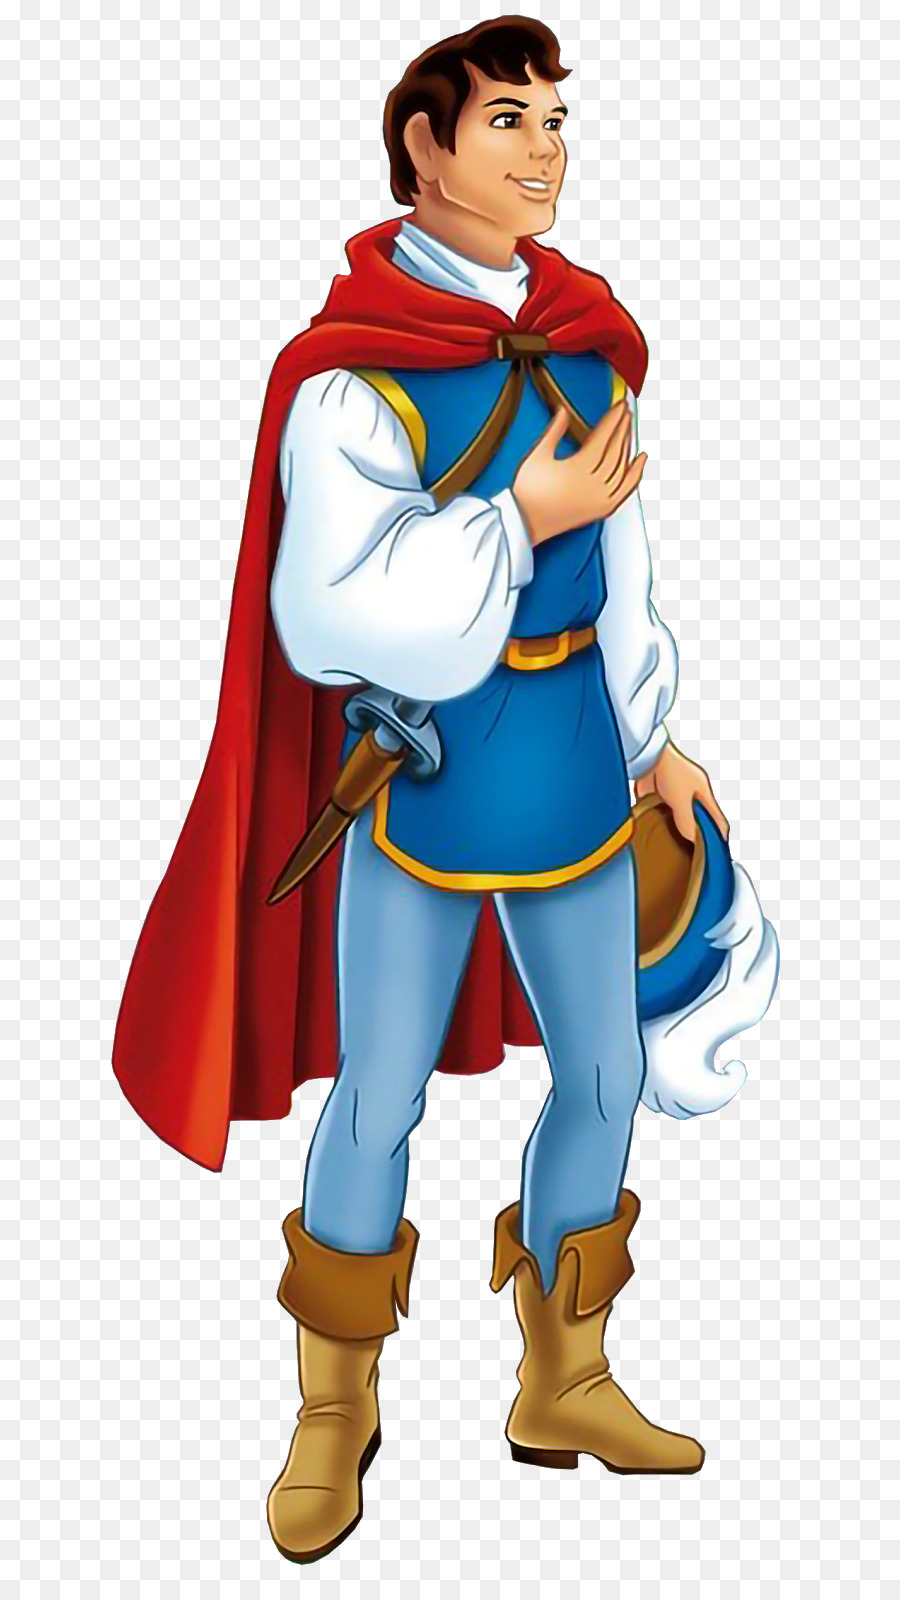 Snow White and the Seven Dwarfs Prince Charming Pinocchio Superman - snow white and the seven dwarfs png download - 782*1600 - Free Transparent Snow White And The Seven Dwarfs png Download.